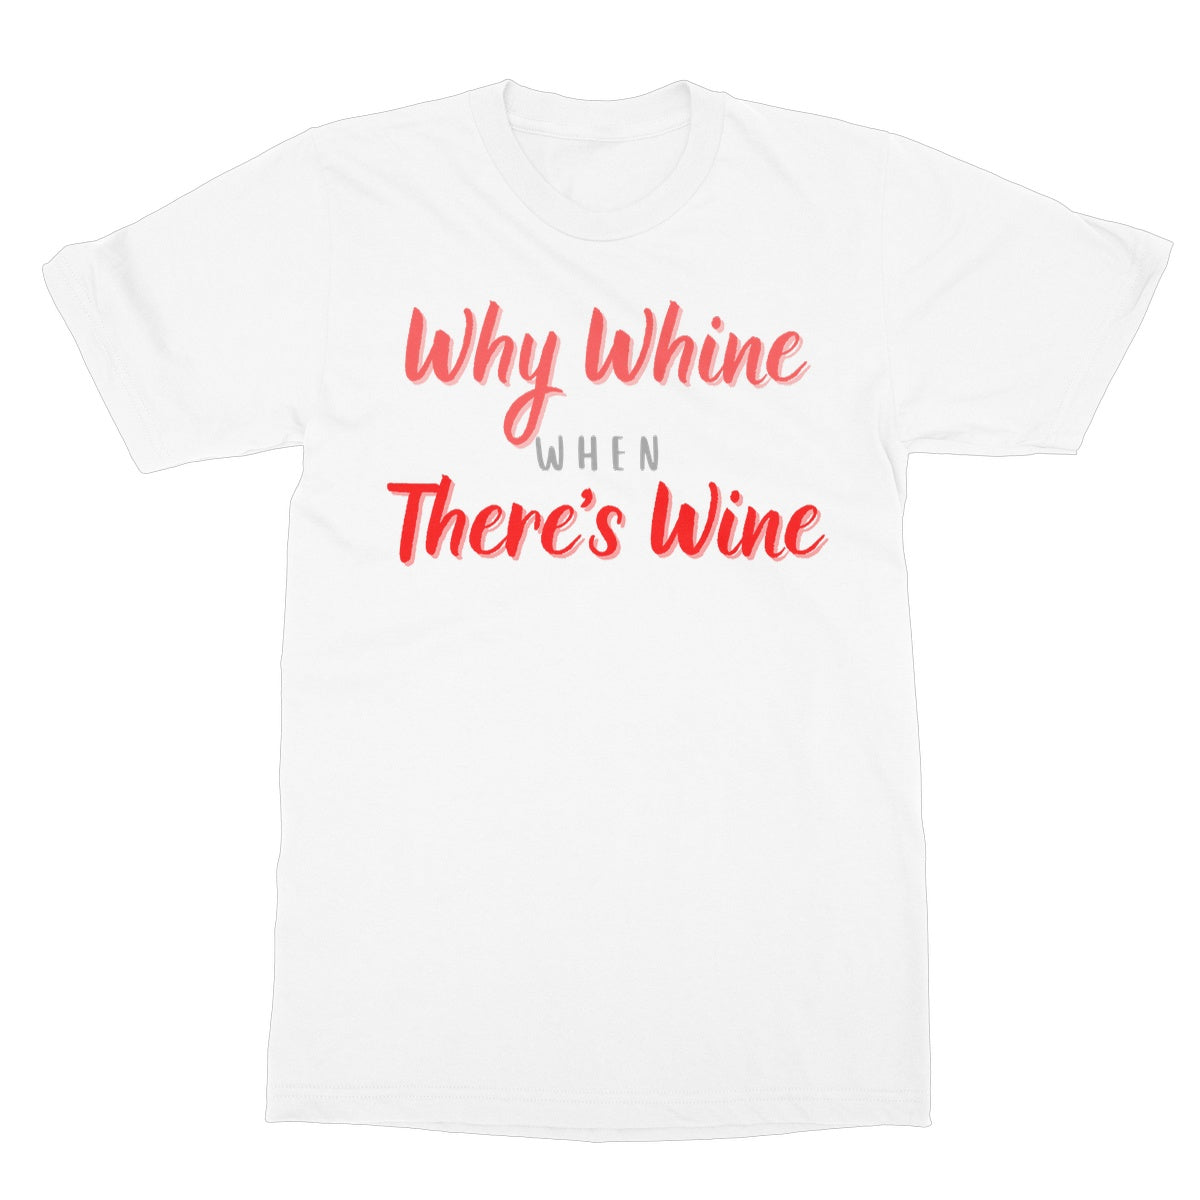 why whine when there's wine t shirt white